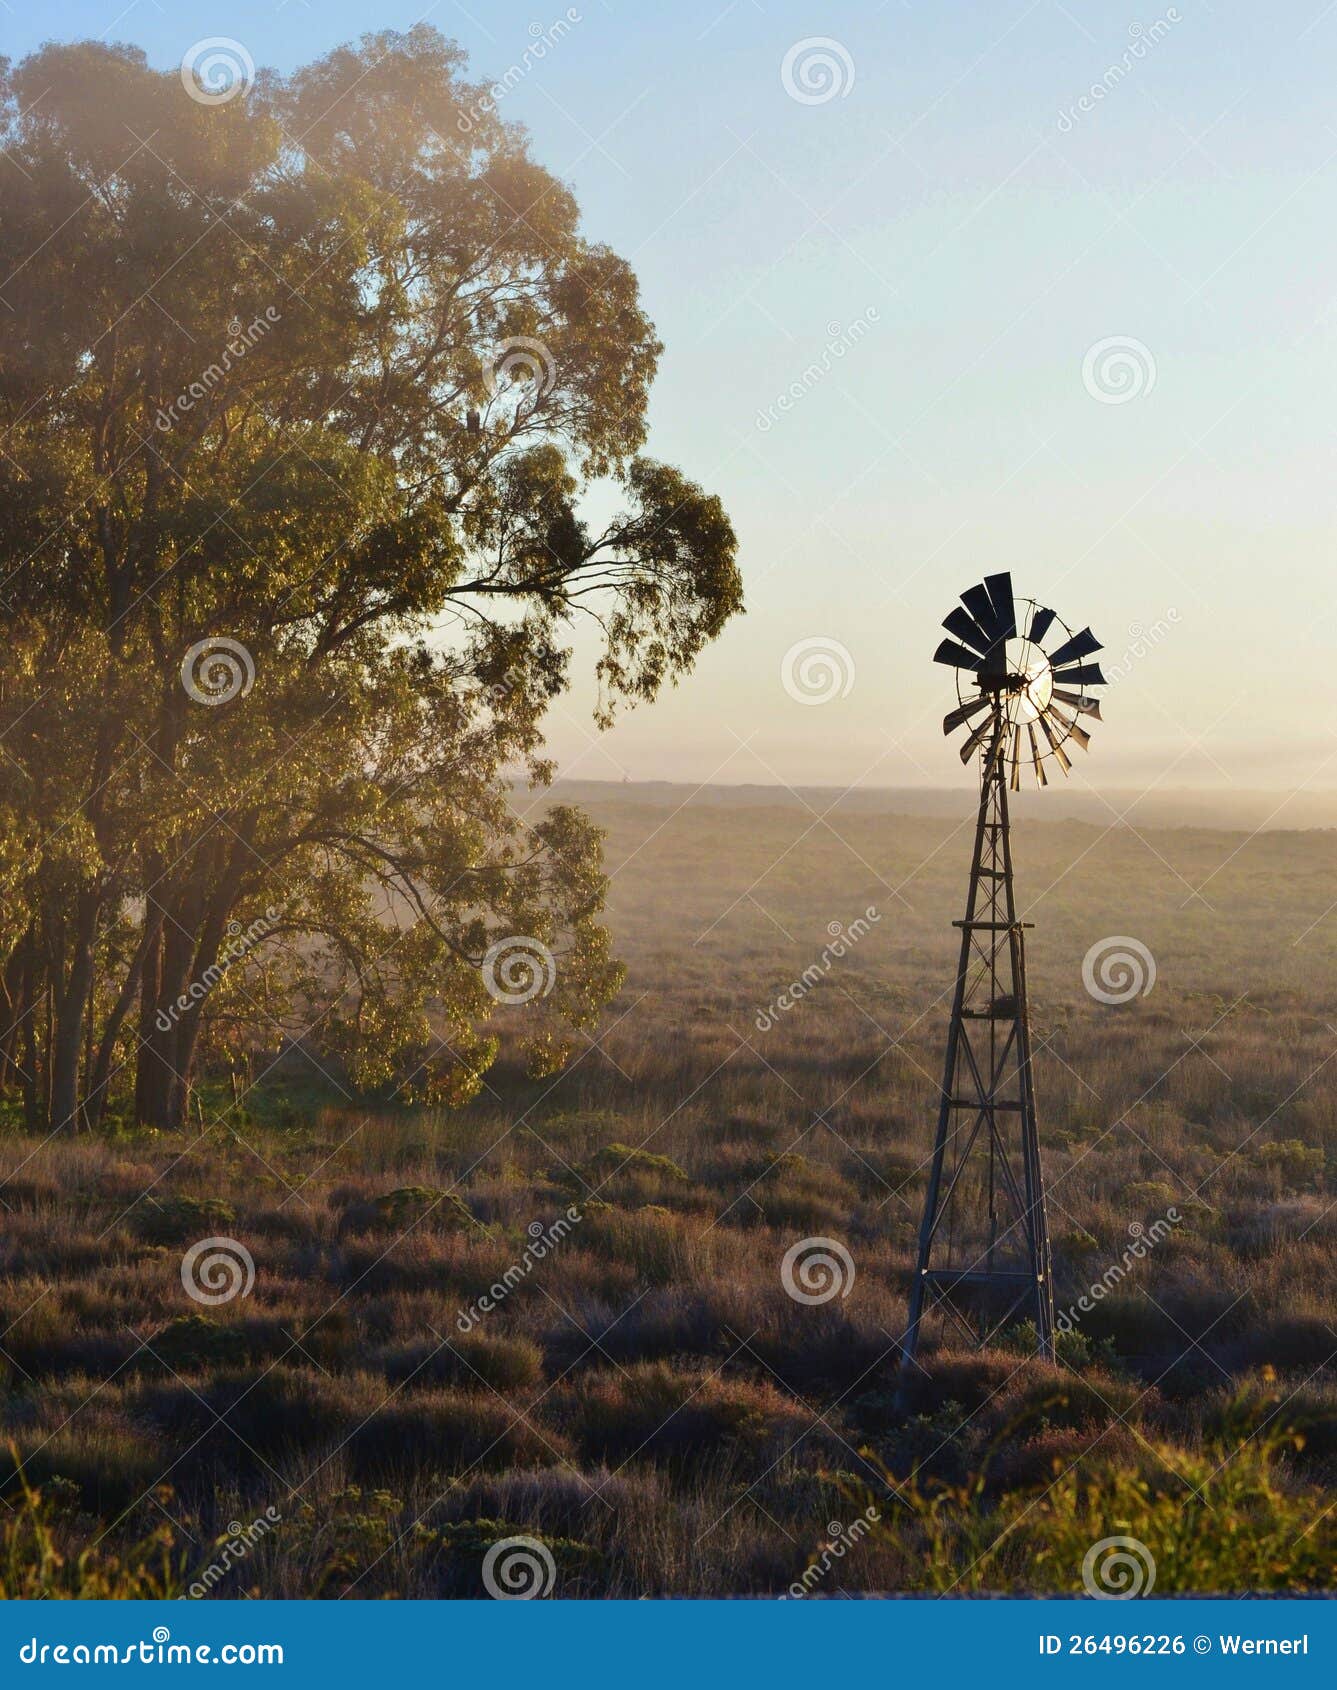 Landscape with Windmill water pump at sunrise with blue gum trees.